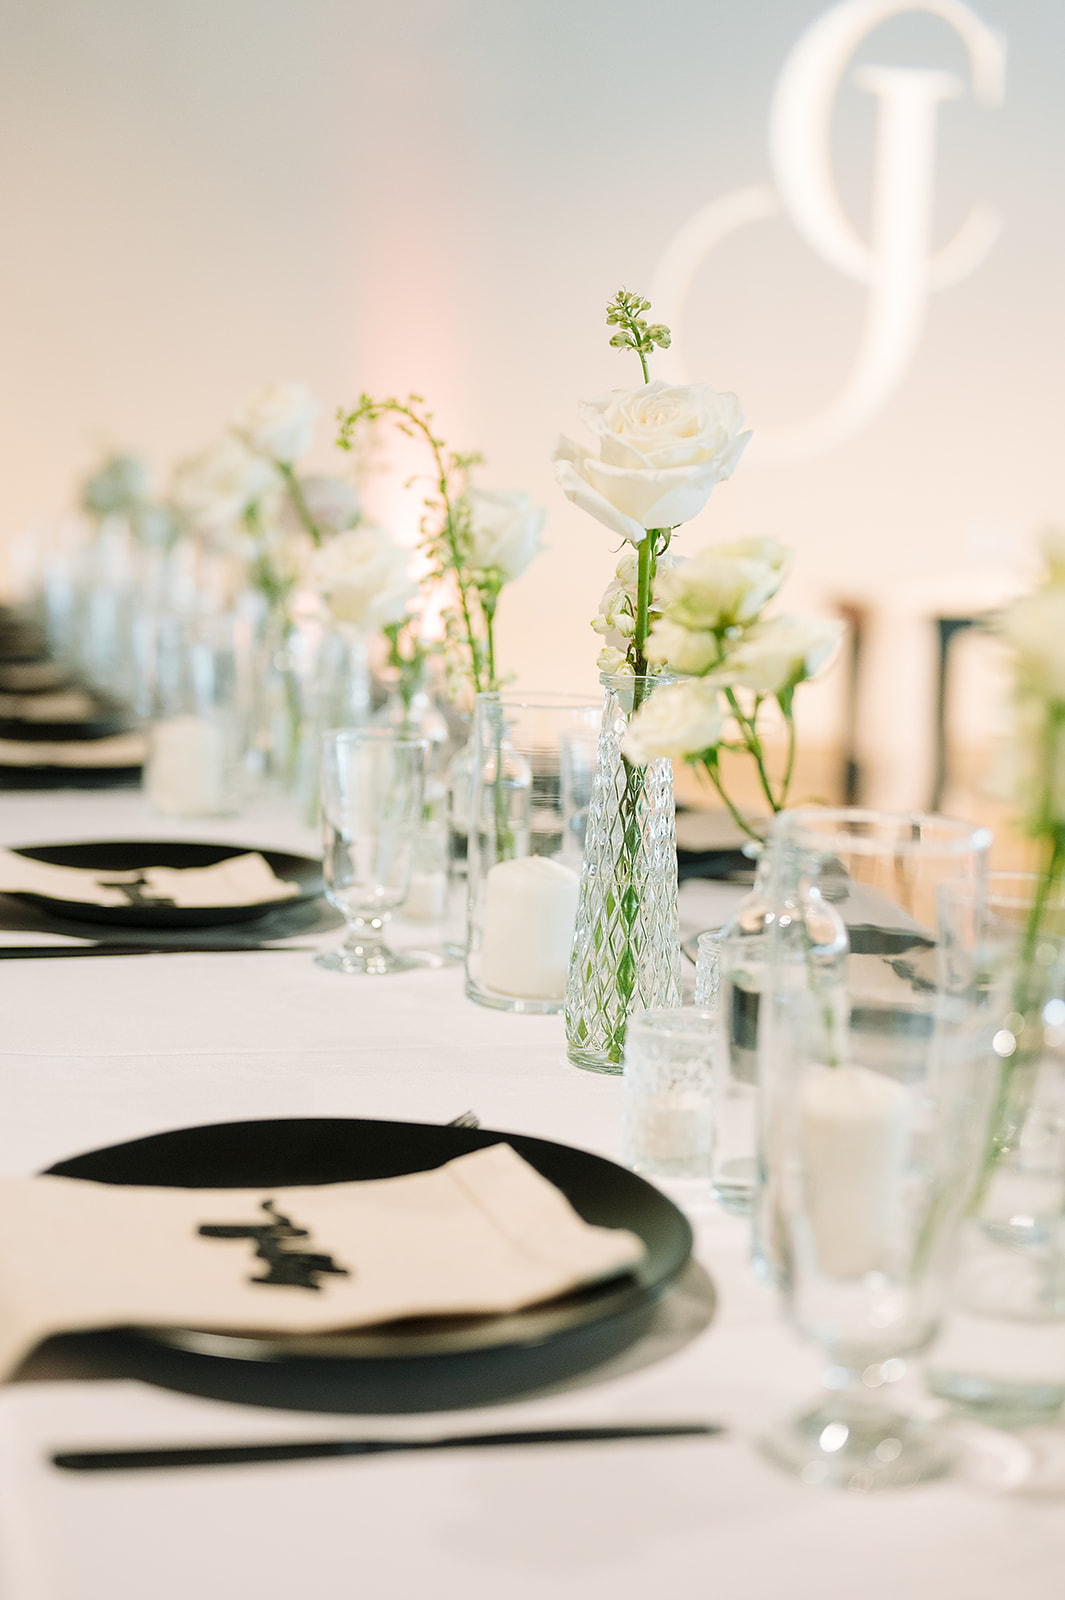 Details of a wedding reception table setup with white roses